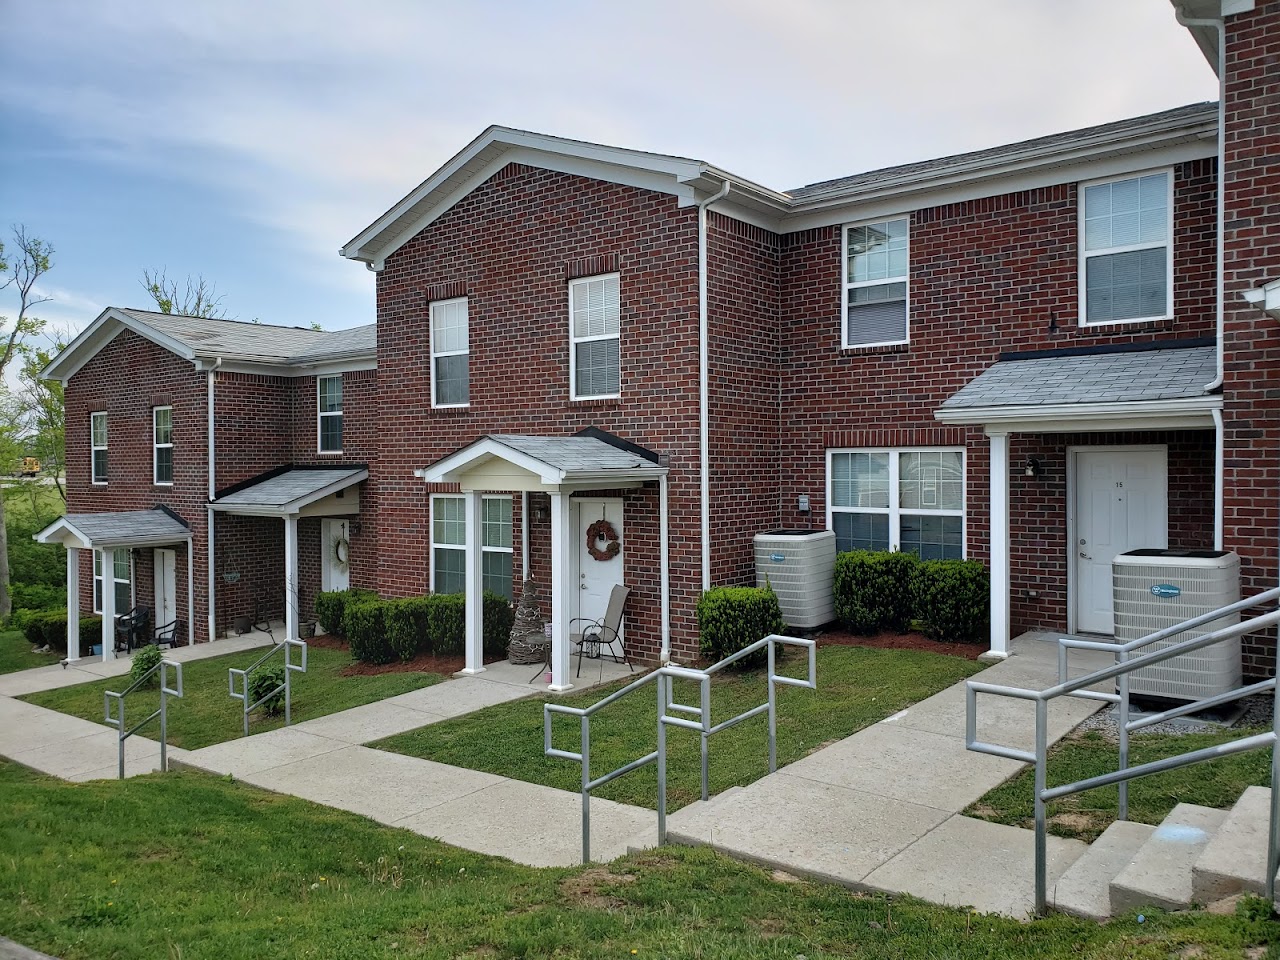 Photo of MENEMSHA TOWNHOMES. Affordable housing located at HOLLAN CIRCLE MAYSVILLE, KY 41056